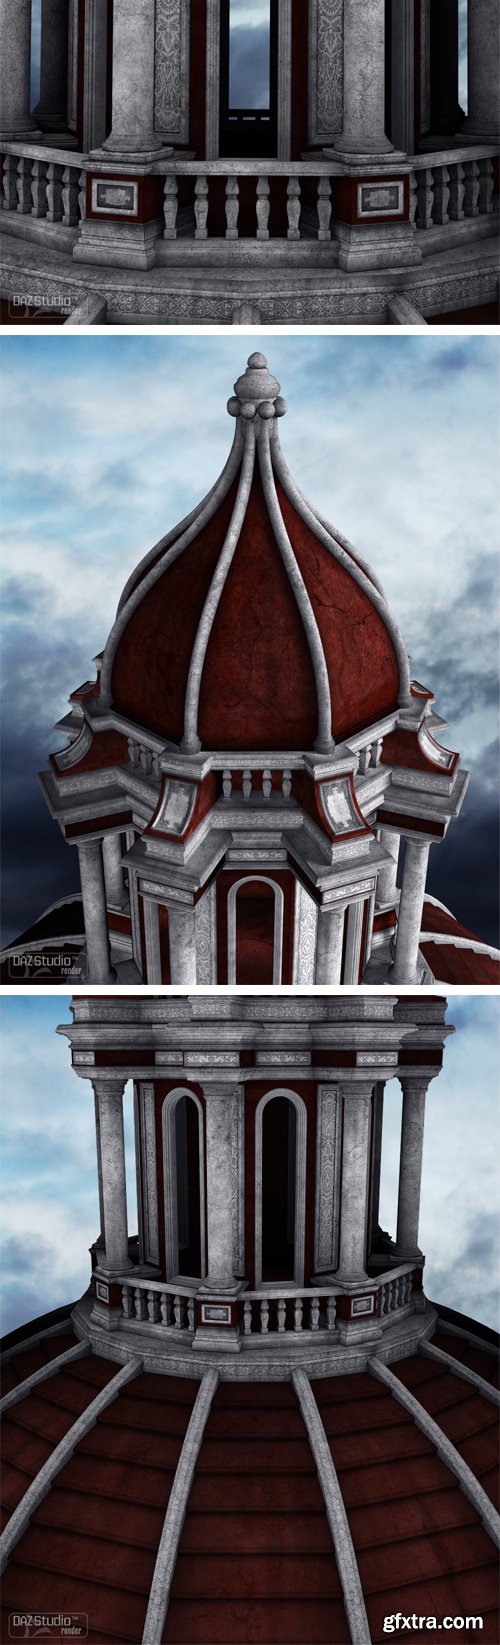 Tower Top - Add-on Texture for the 3D Rooftop